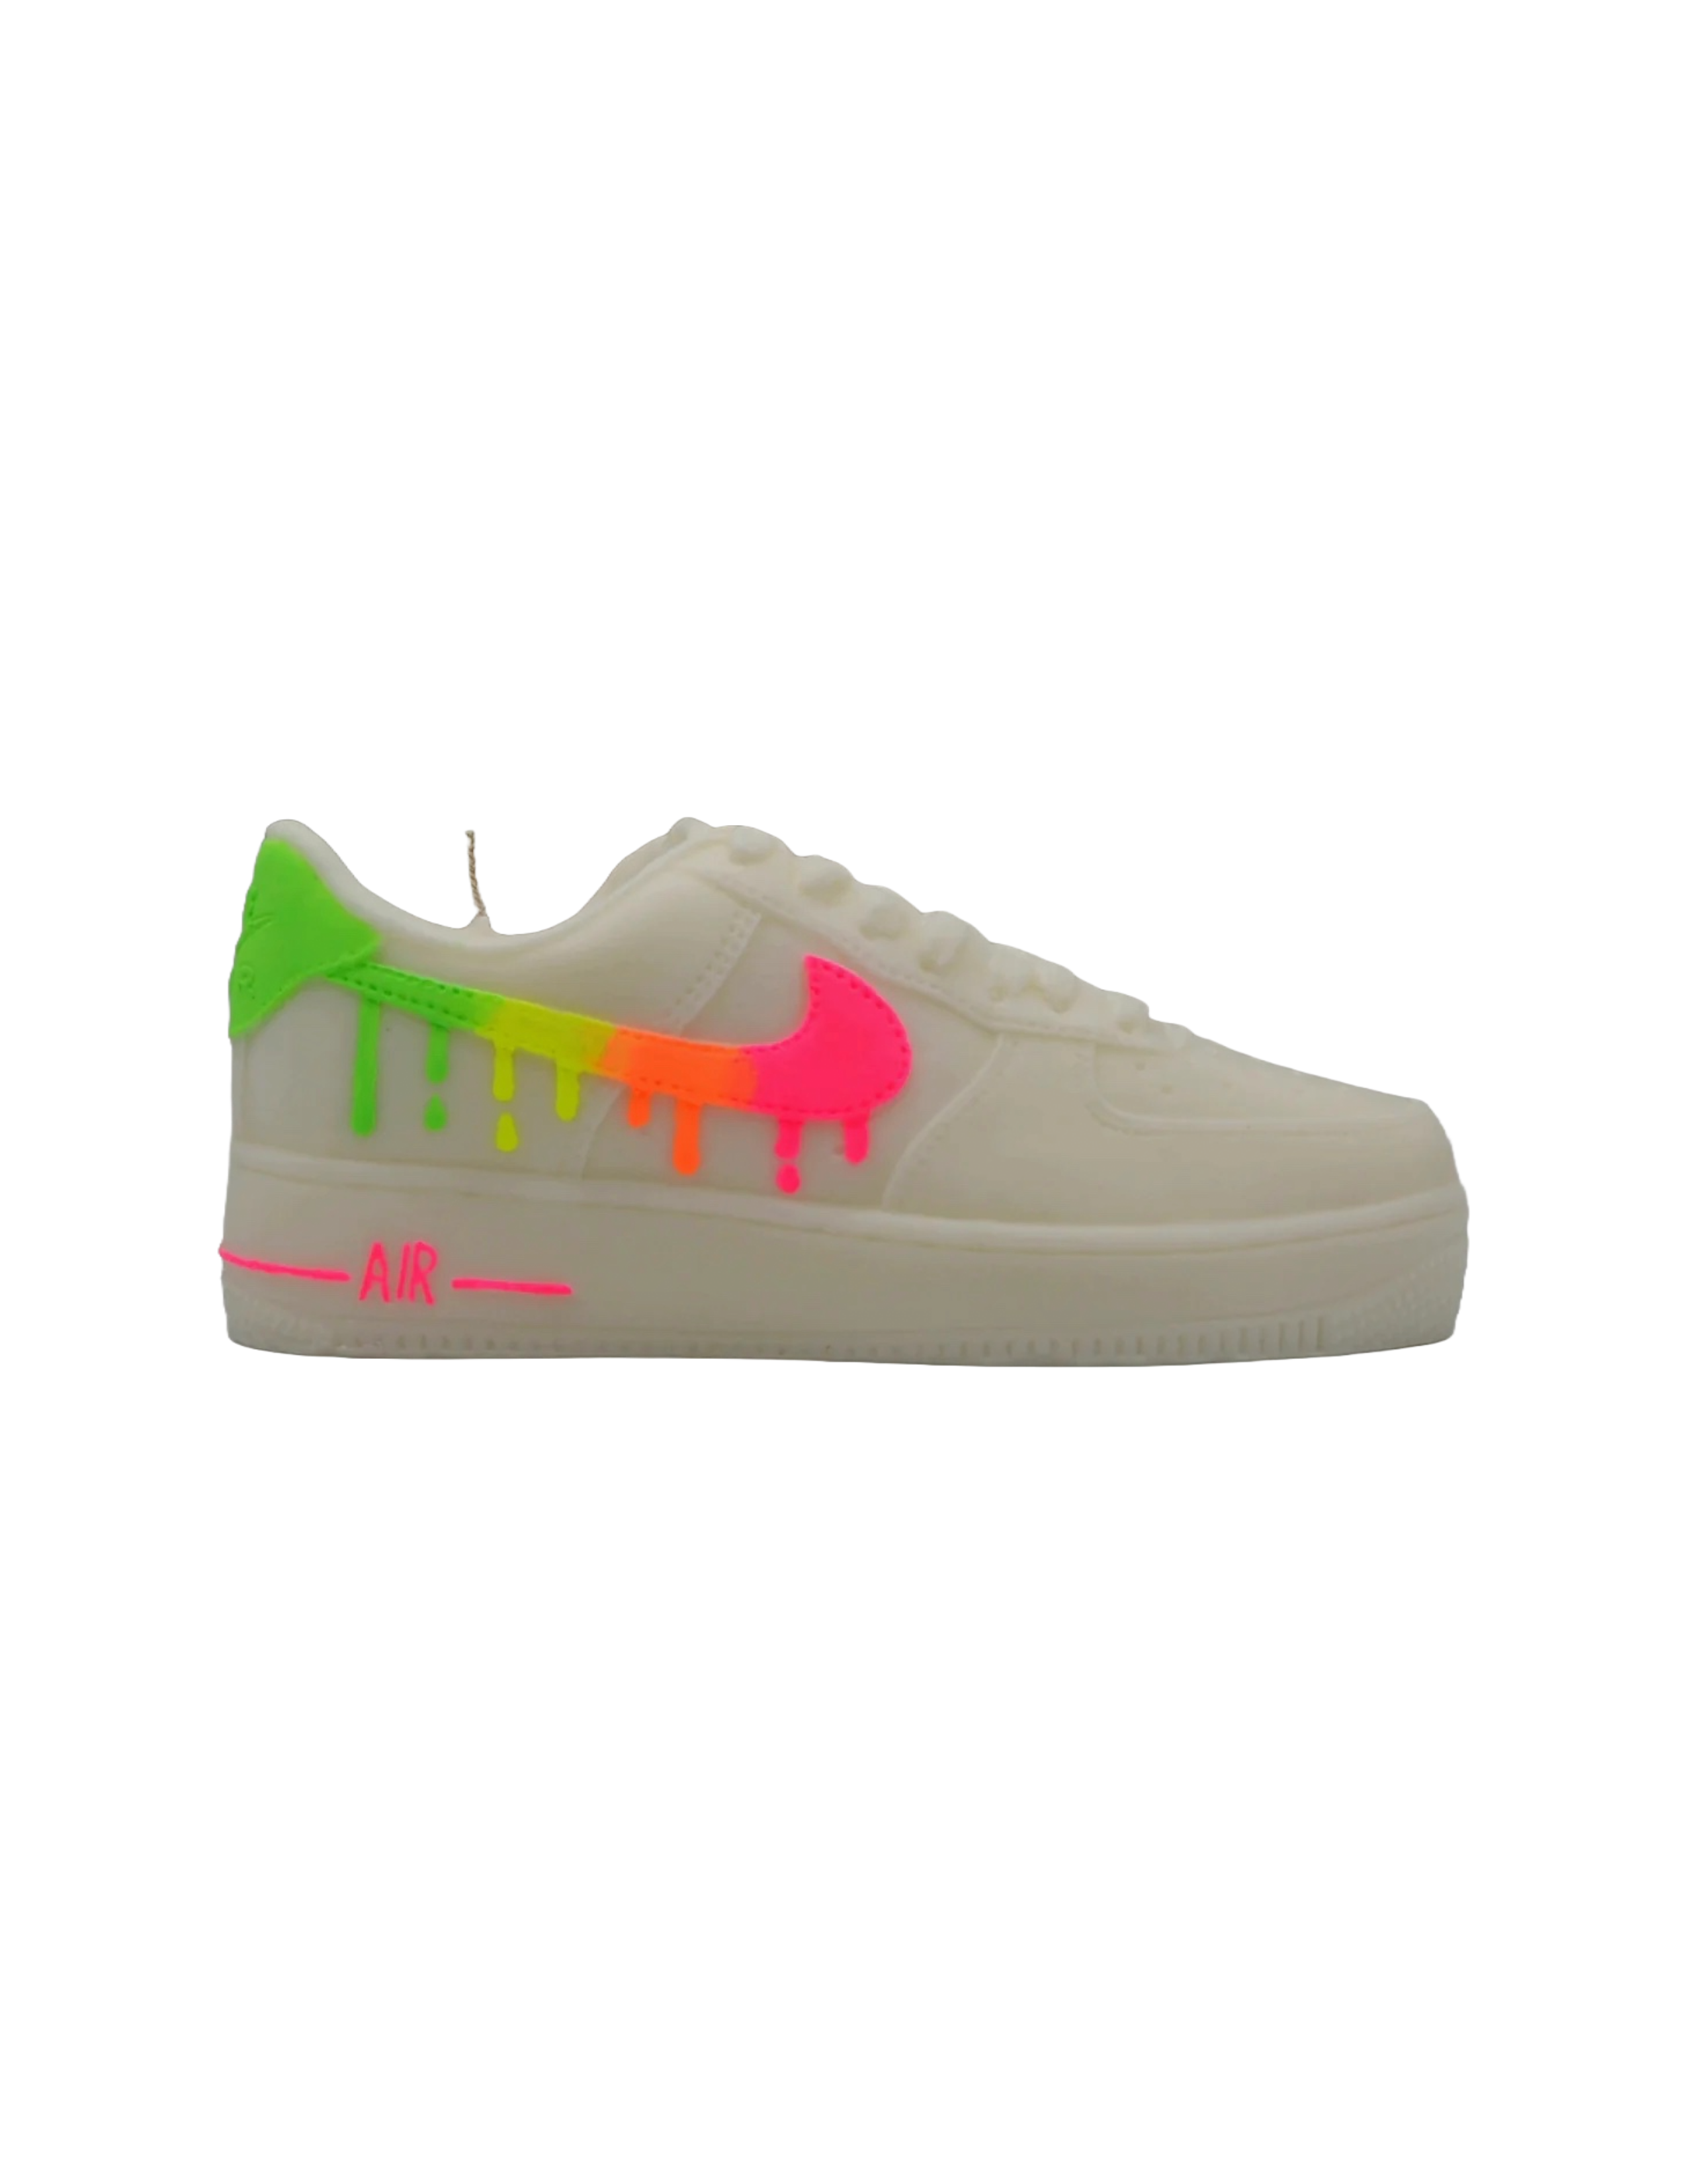 Totally Don't Drip Low Top Candle - White/Neon